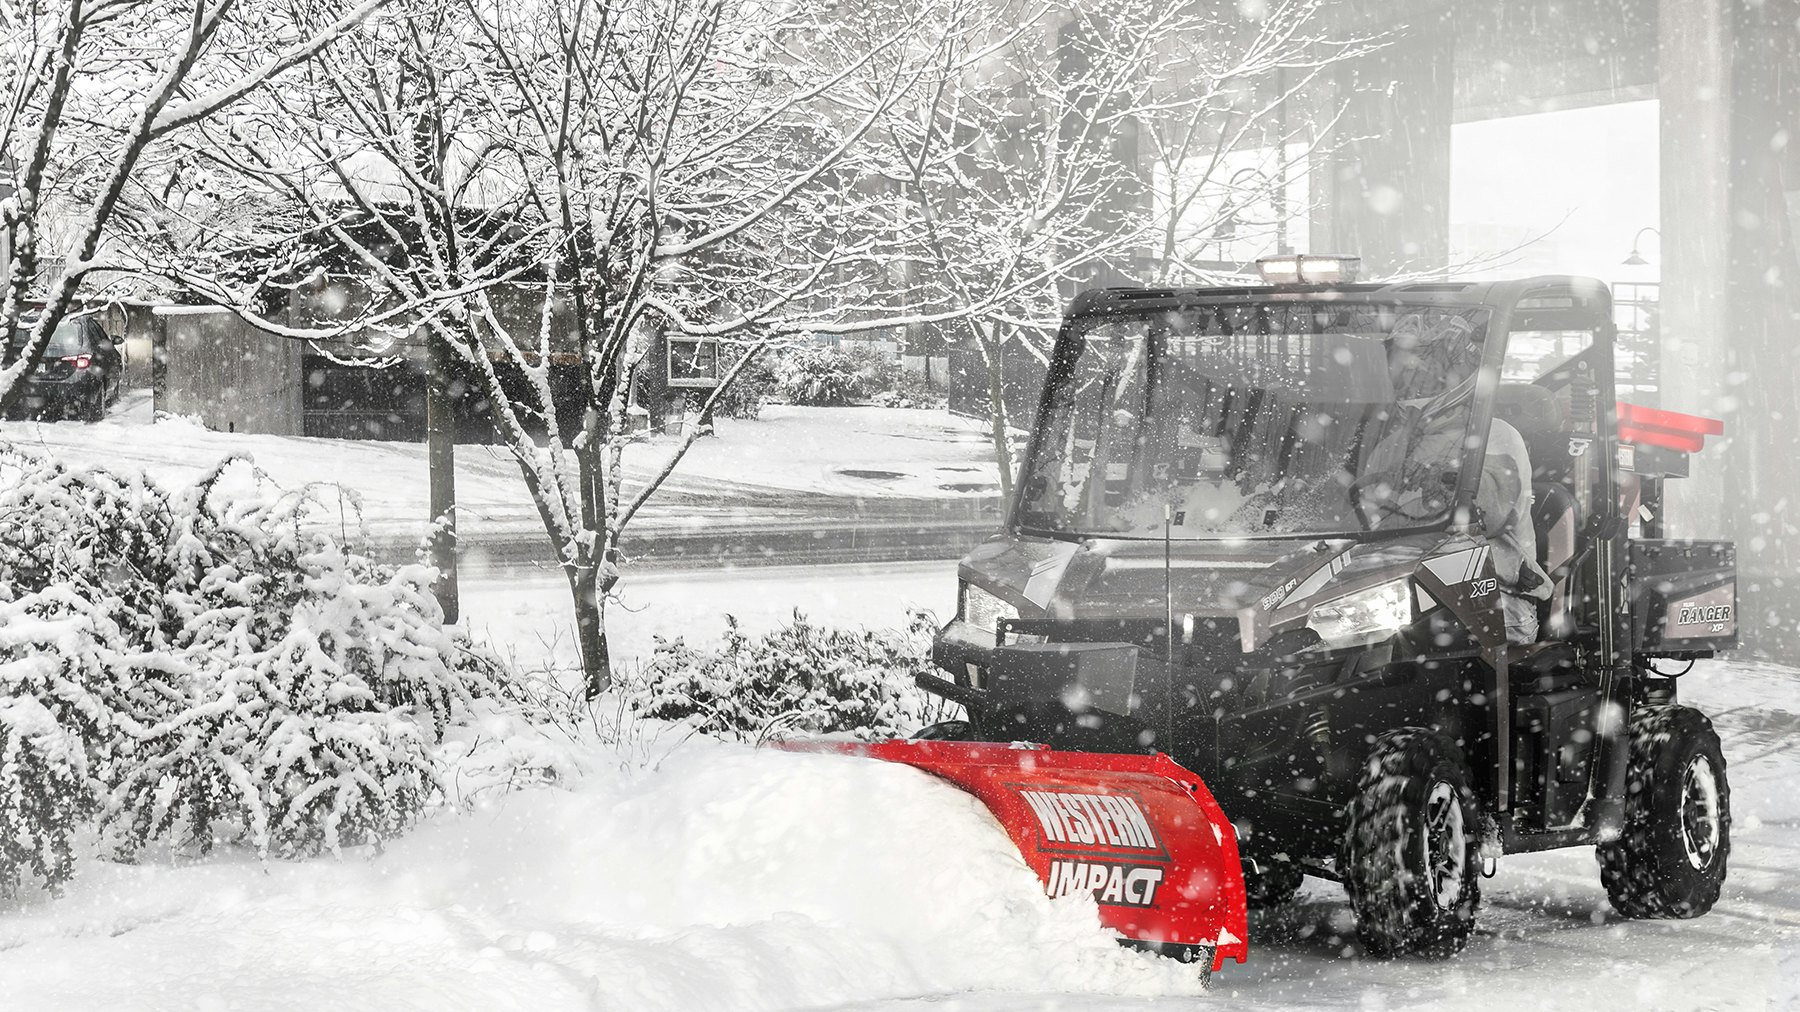 Once you have decided on the best plow for your utility vehicle, you’ll want to make sure it’s set up correctly with the right accessories—including shoe kits, cutting edges, deflectors, and more.